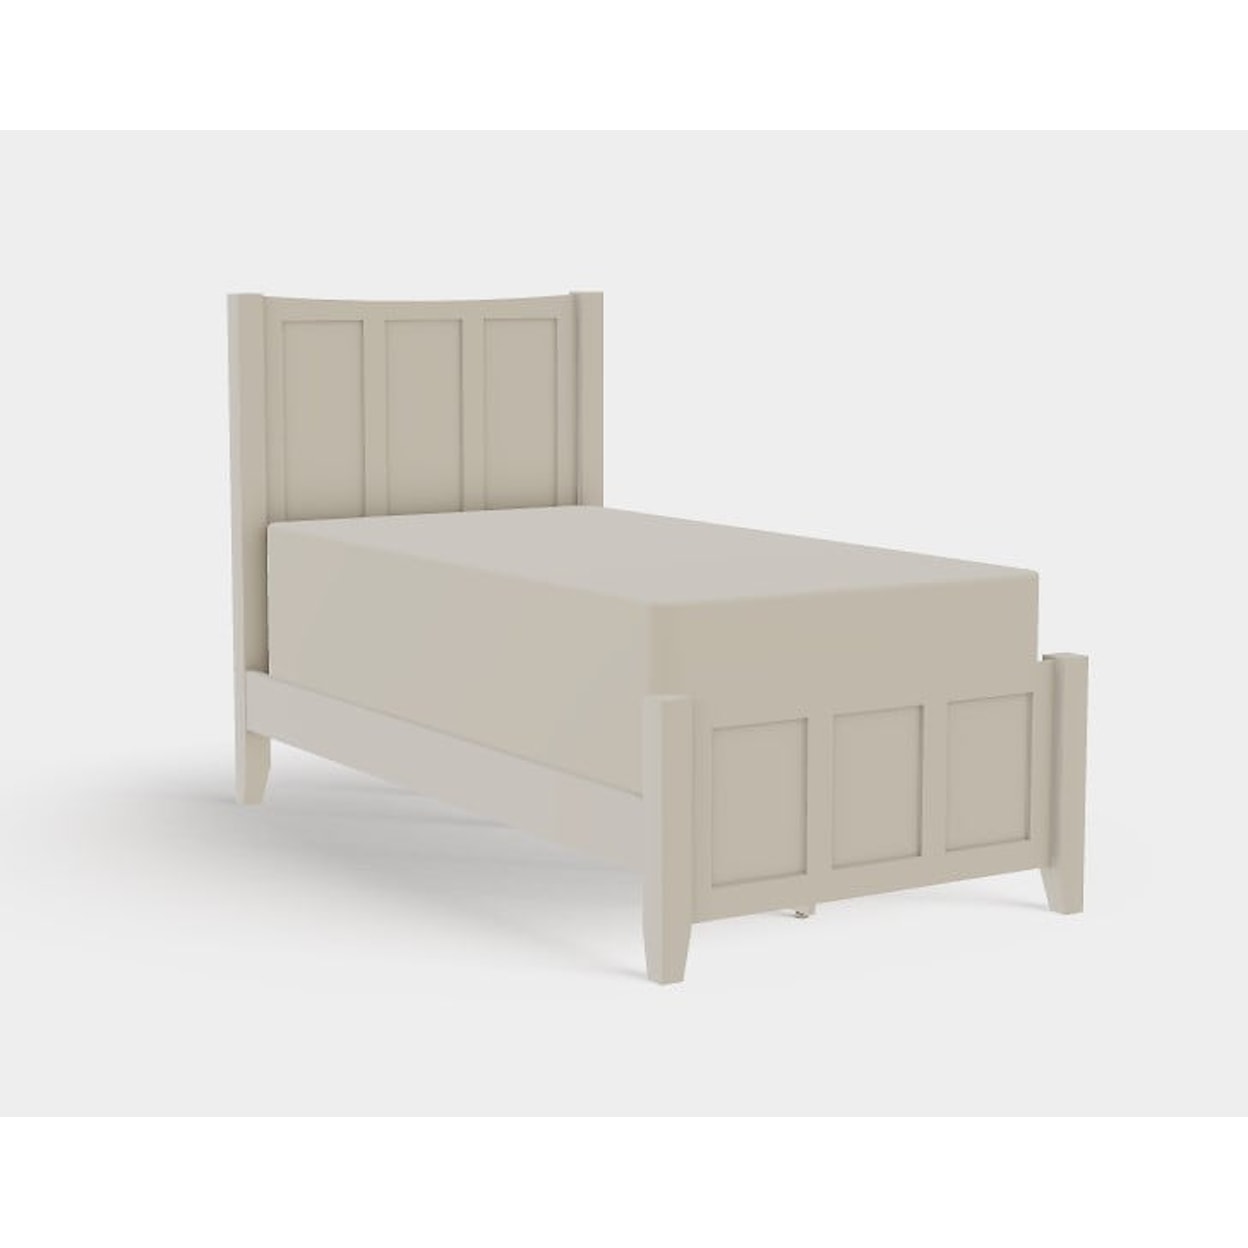 Mavin Atwood Group Atwood Twin XL Low Footboard Panel Bed